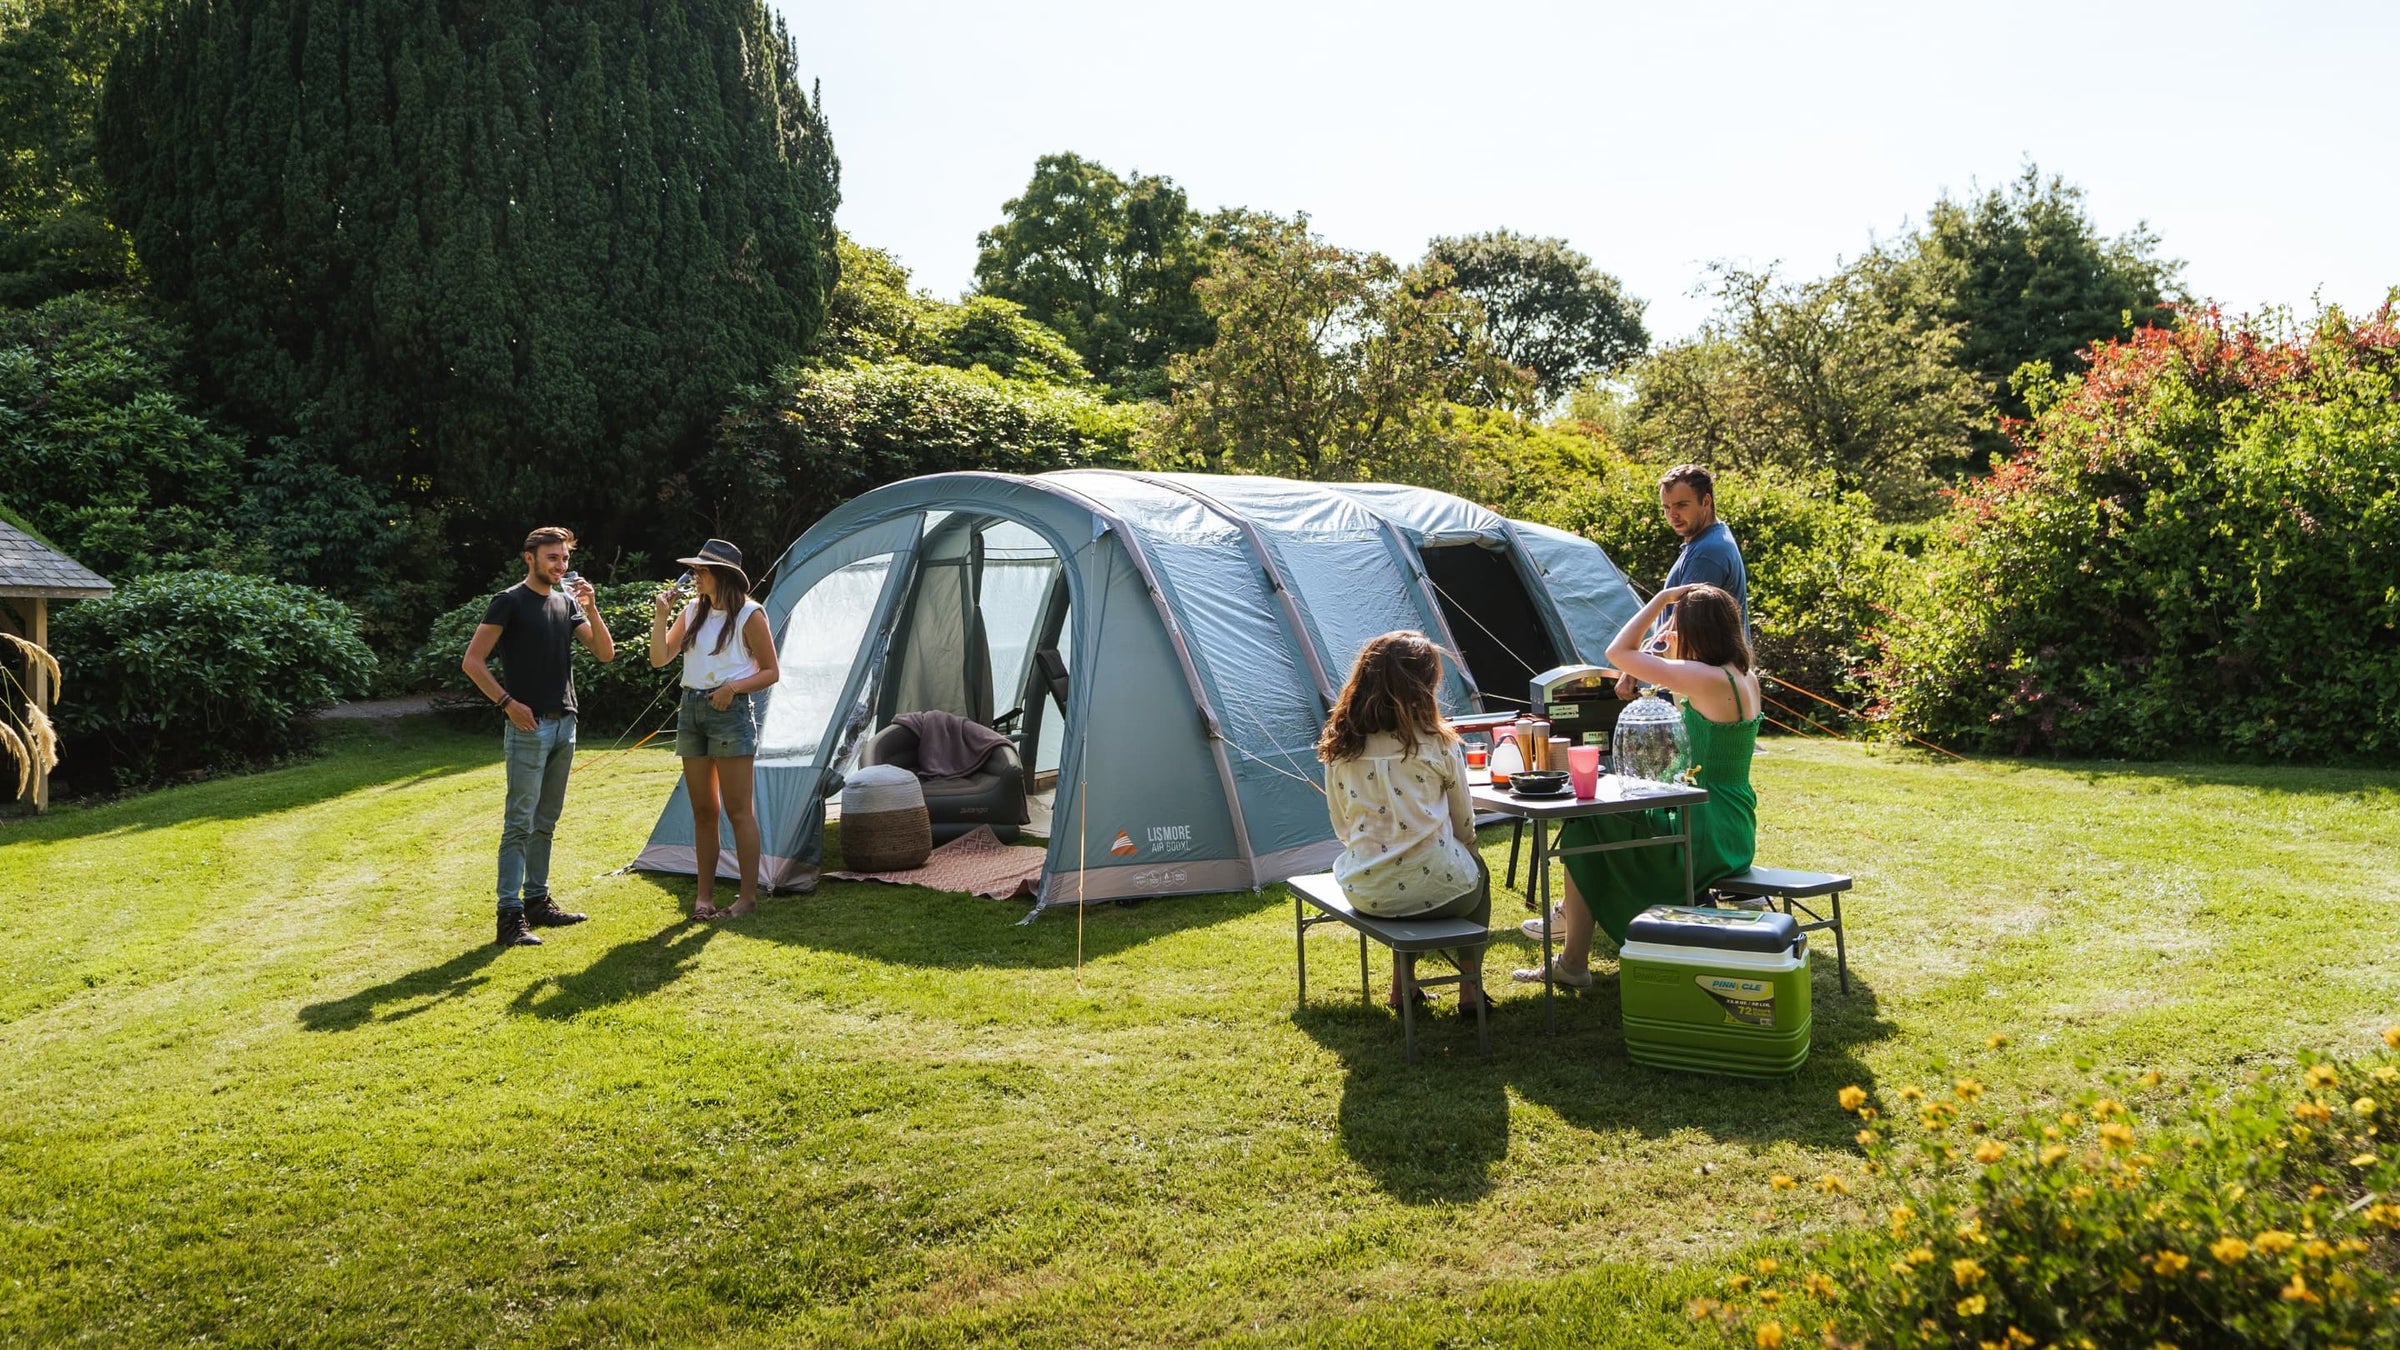 New Season Tents - From major brands Vango, Outdoor Revolution, Outwell, Kampa, and Easy Camp